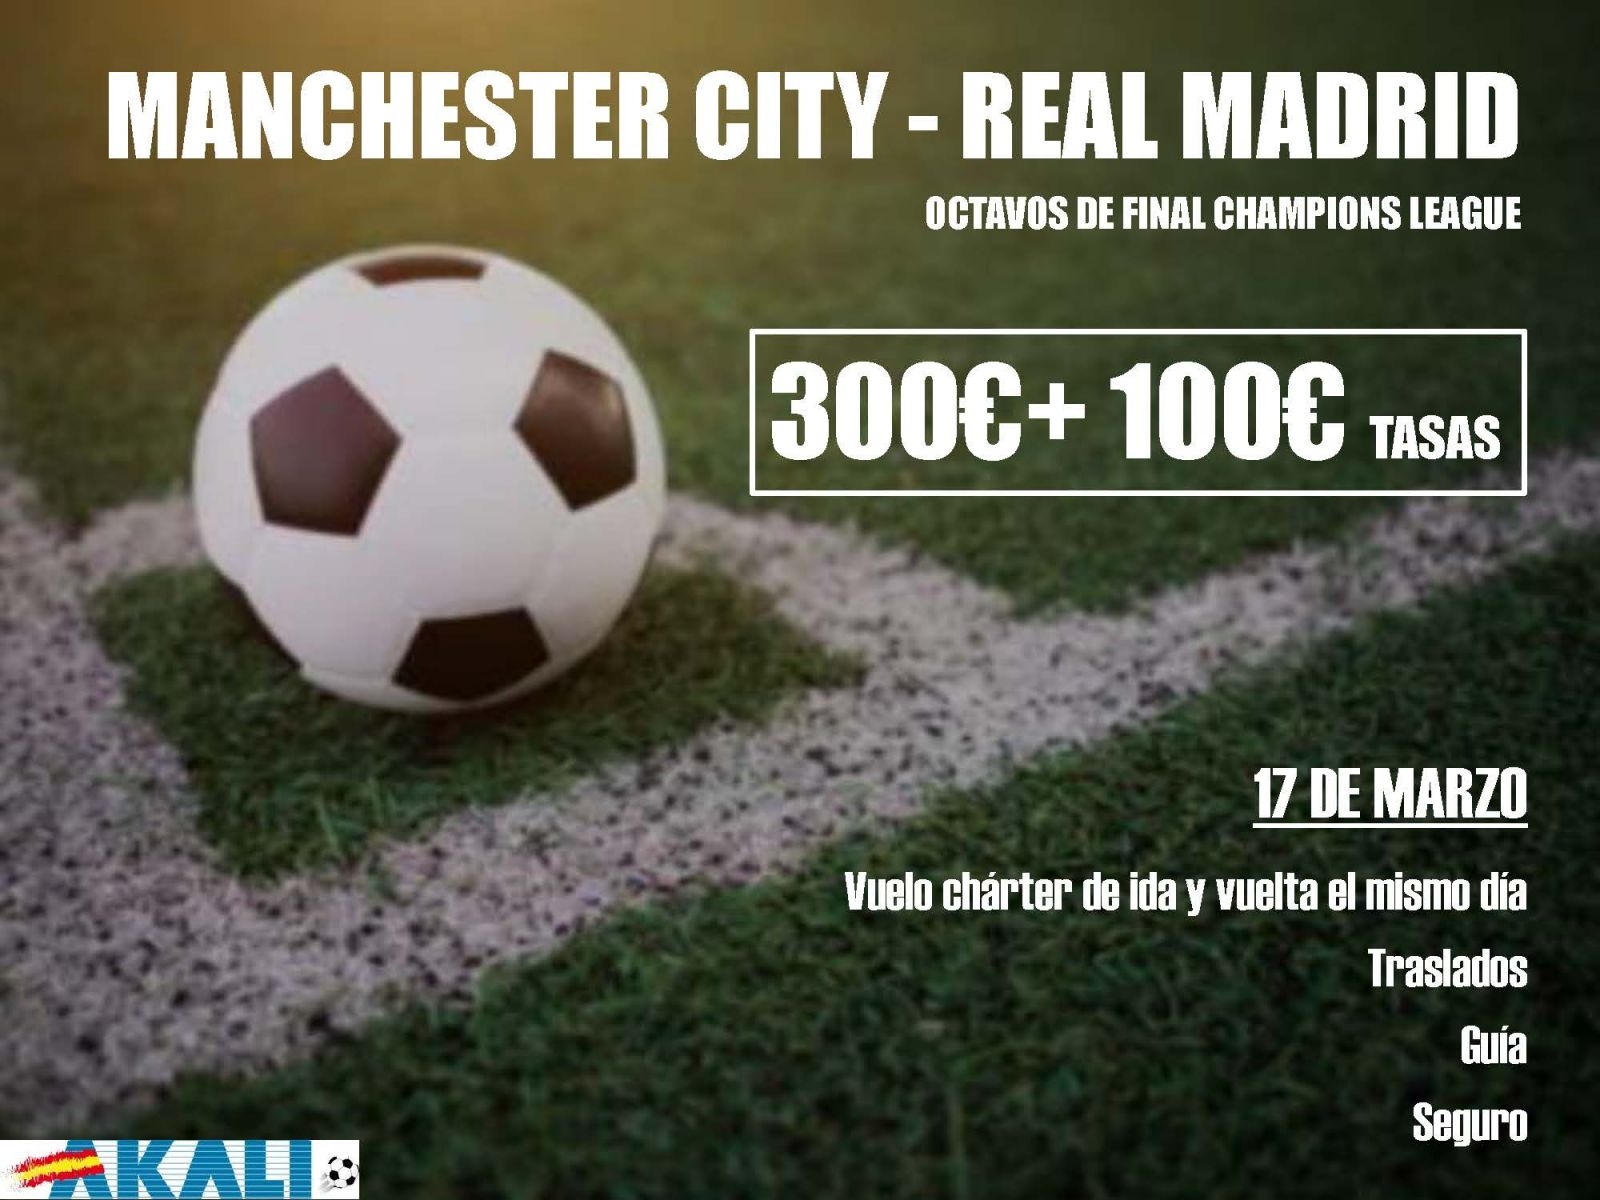 Champions Manchester City - Real Madrid